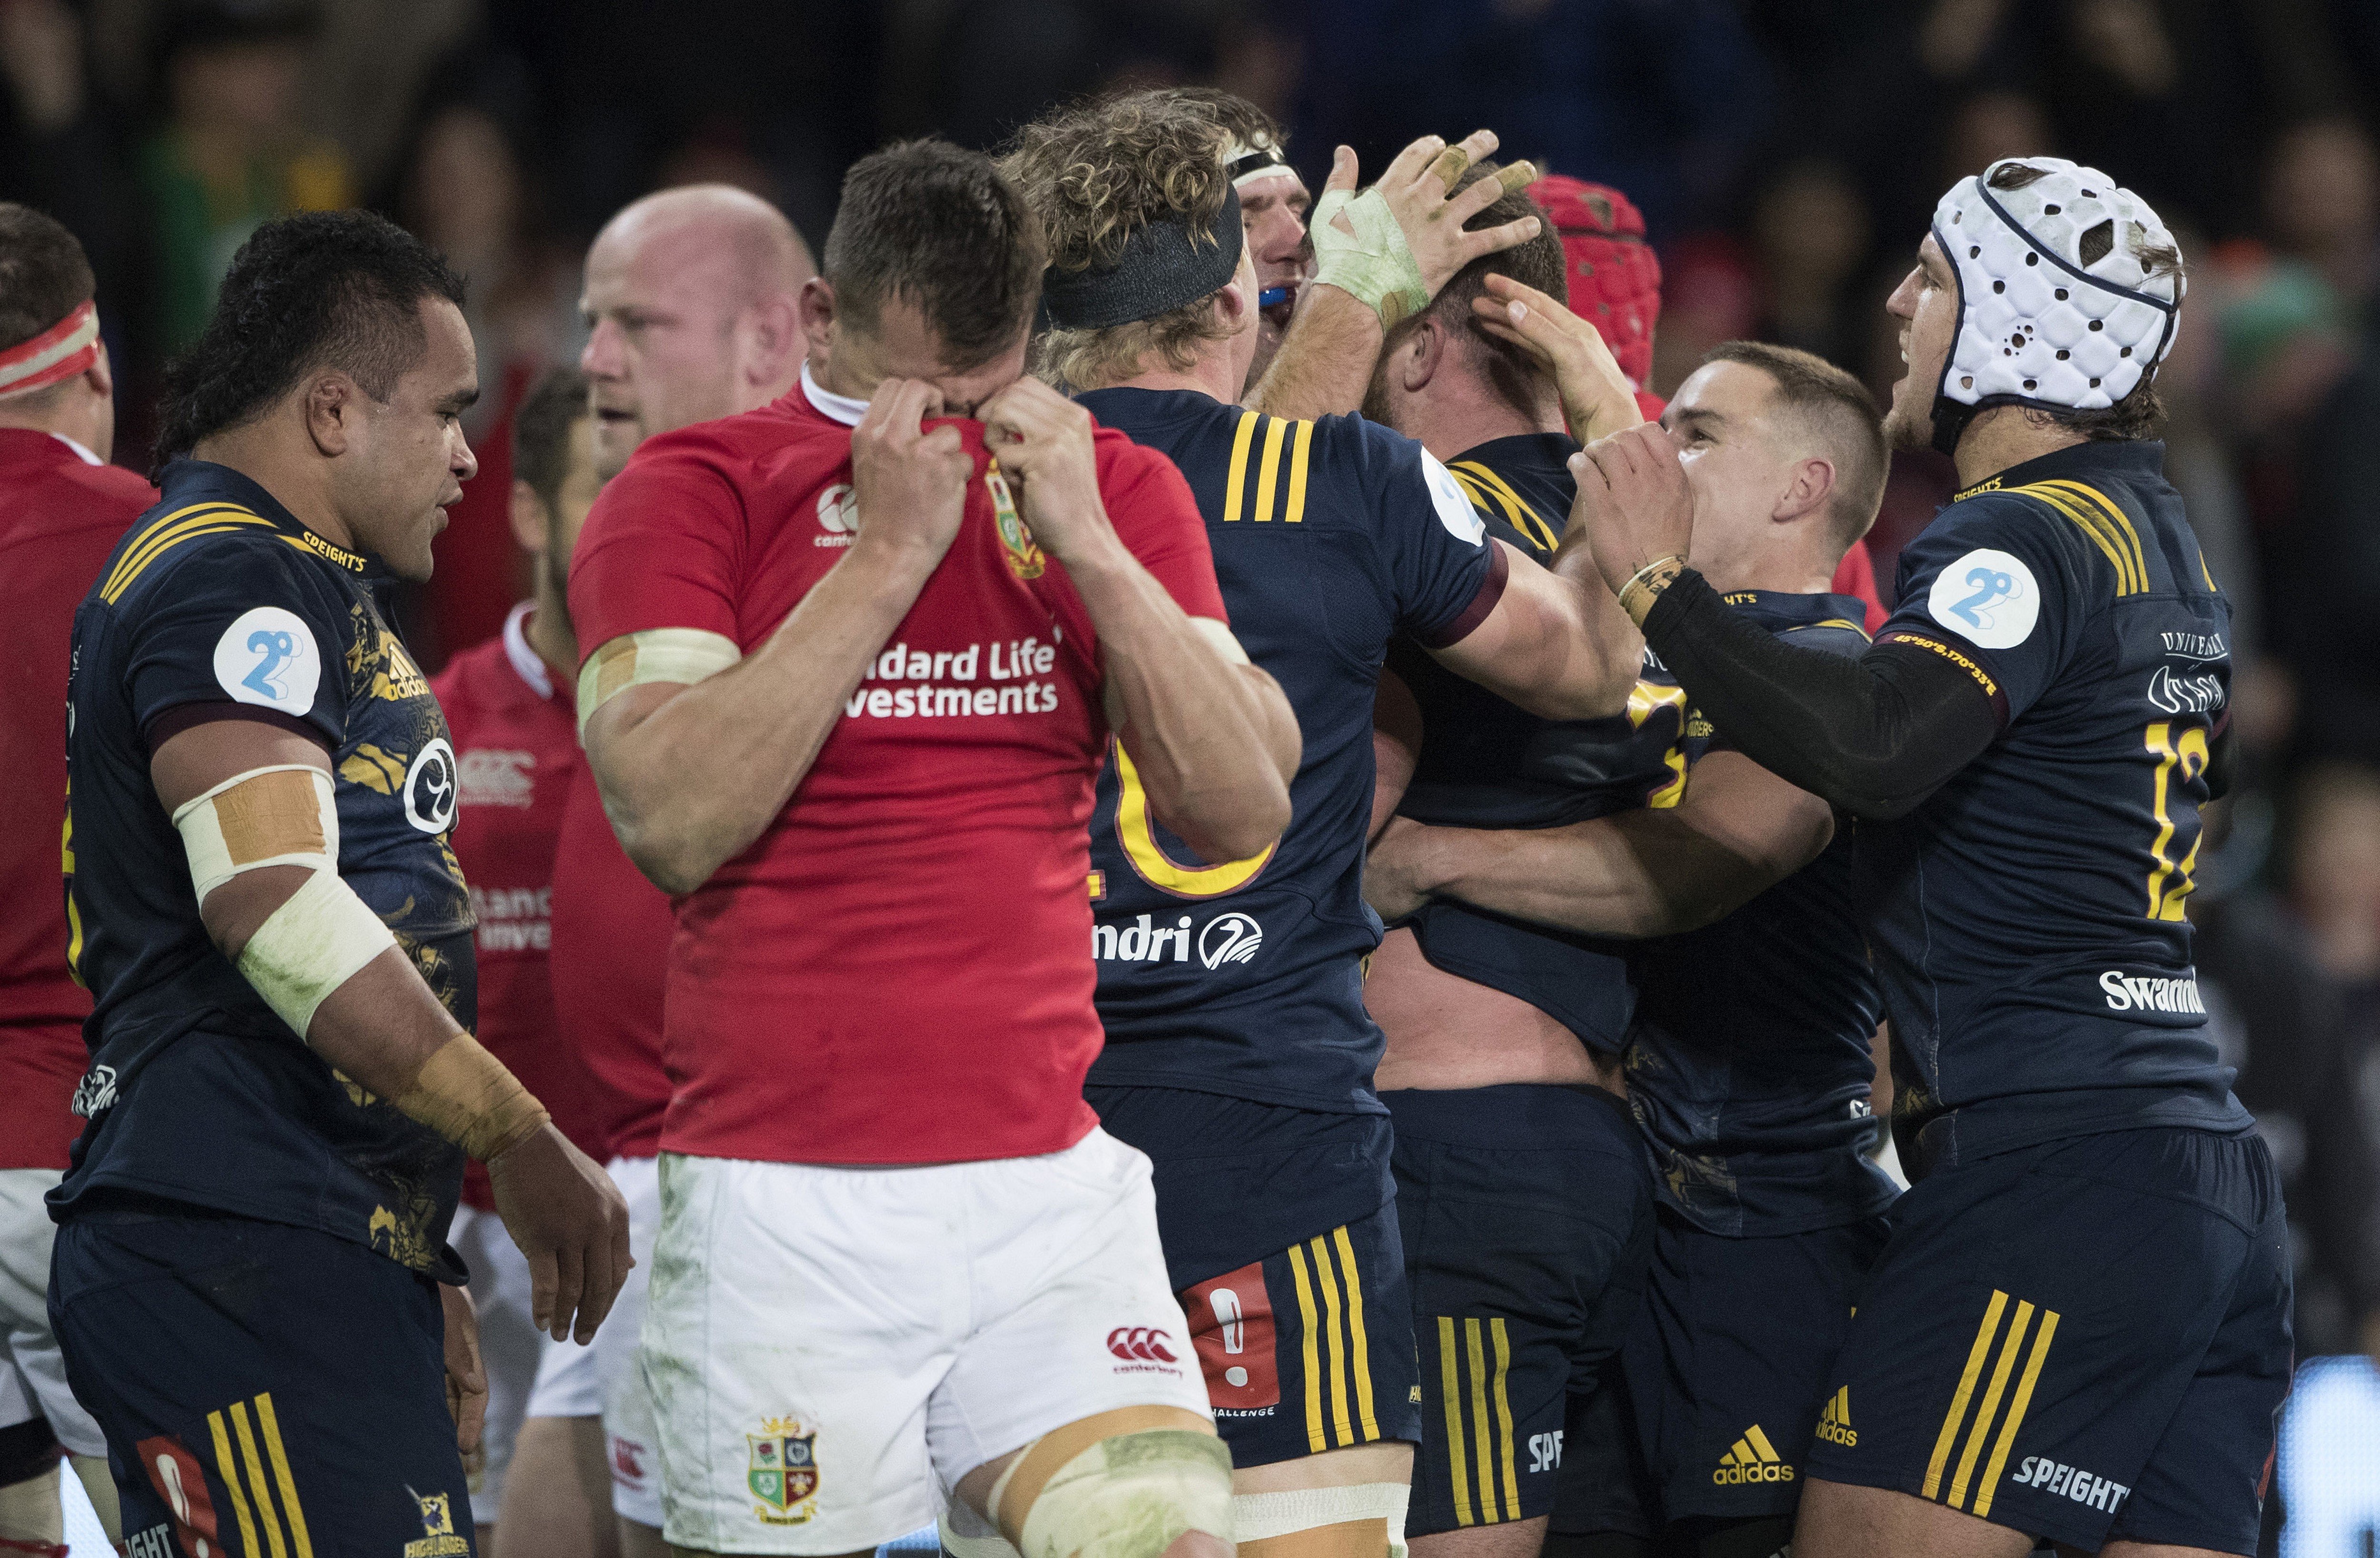 Lions captain Sam Warburton wipes his face as the Highlanders celebrate a try in their nail-biting victory in Dunedin. Photo: AP